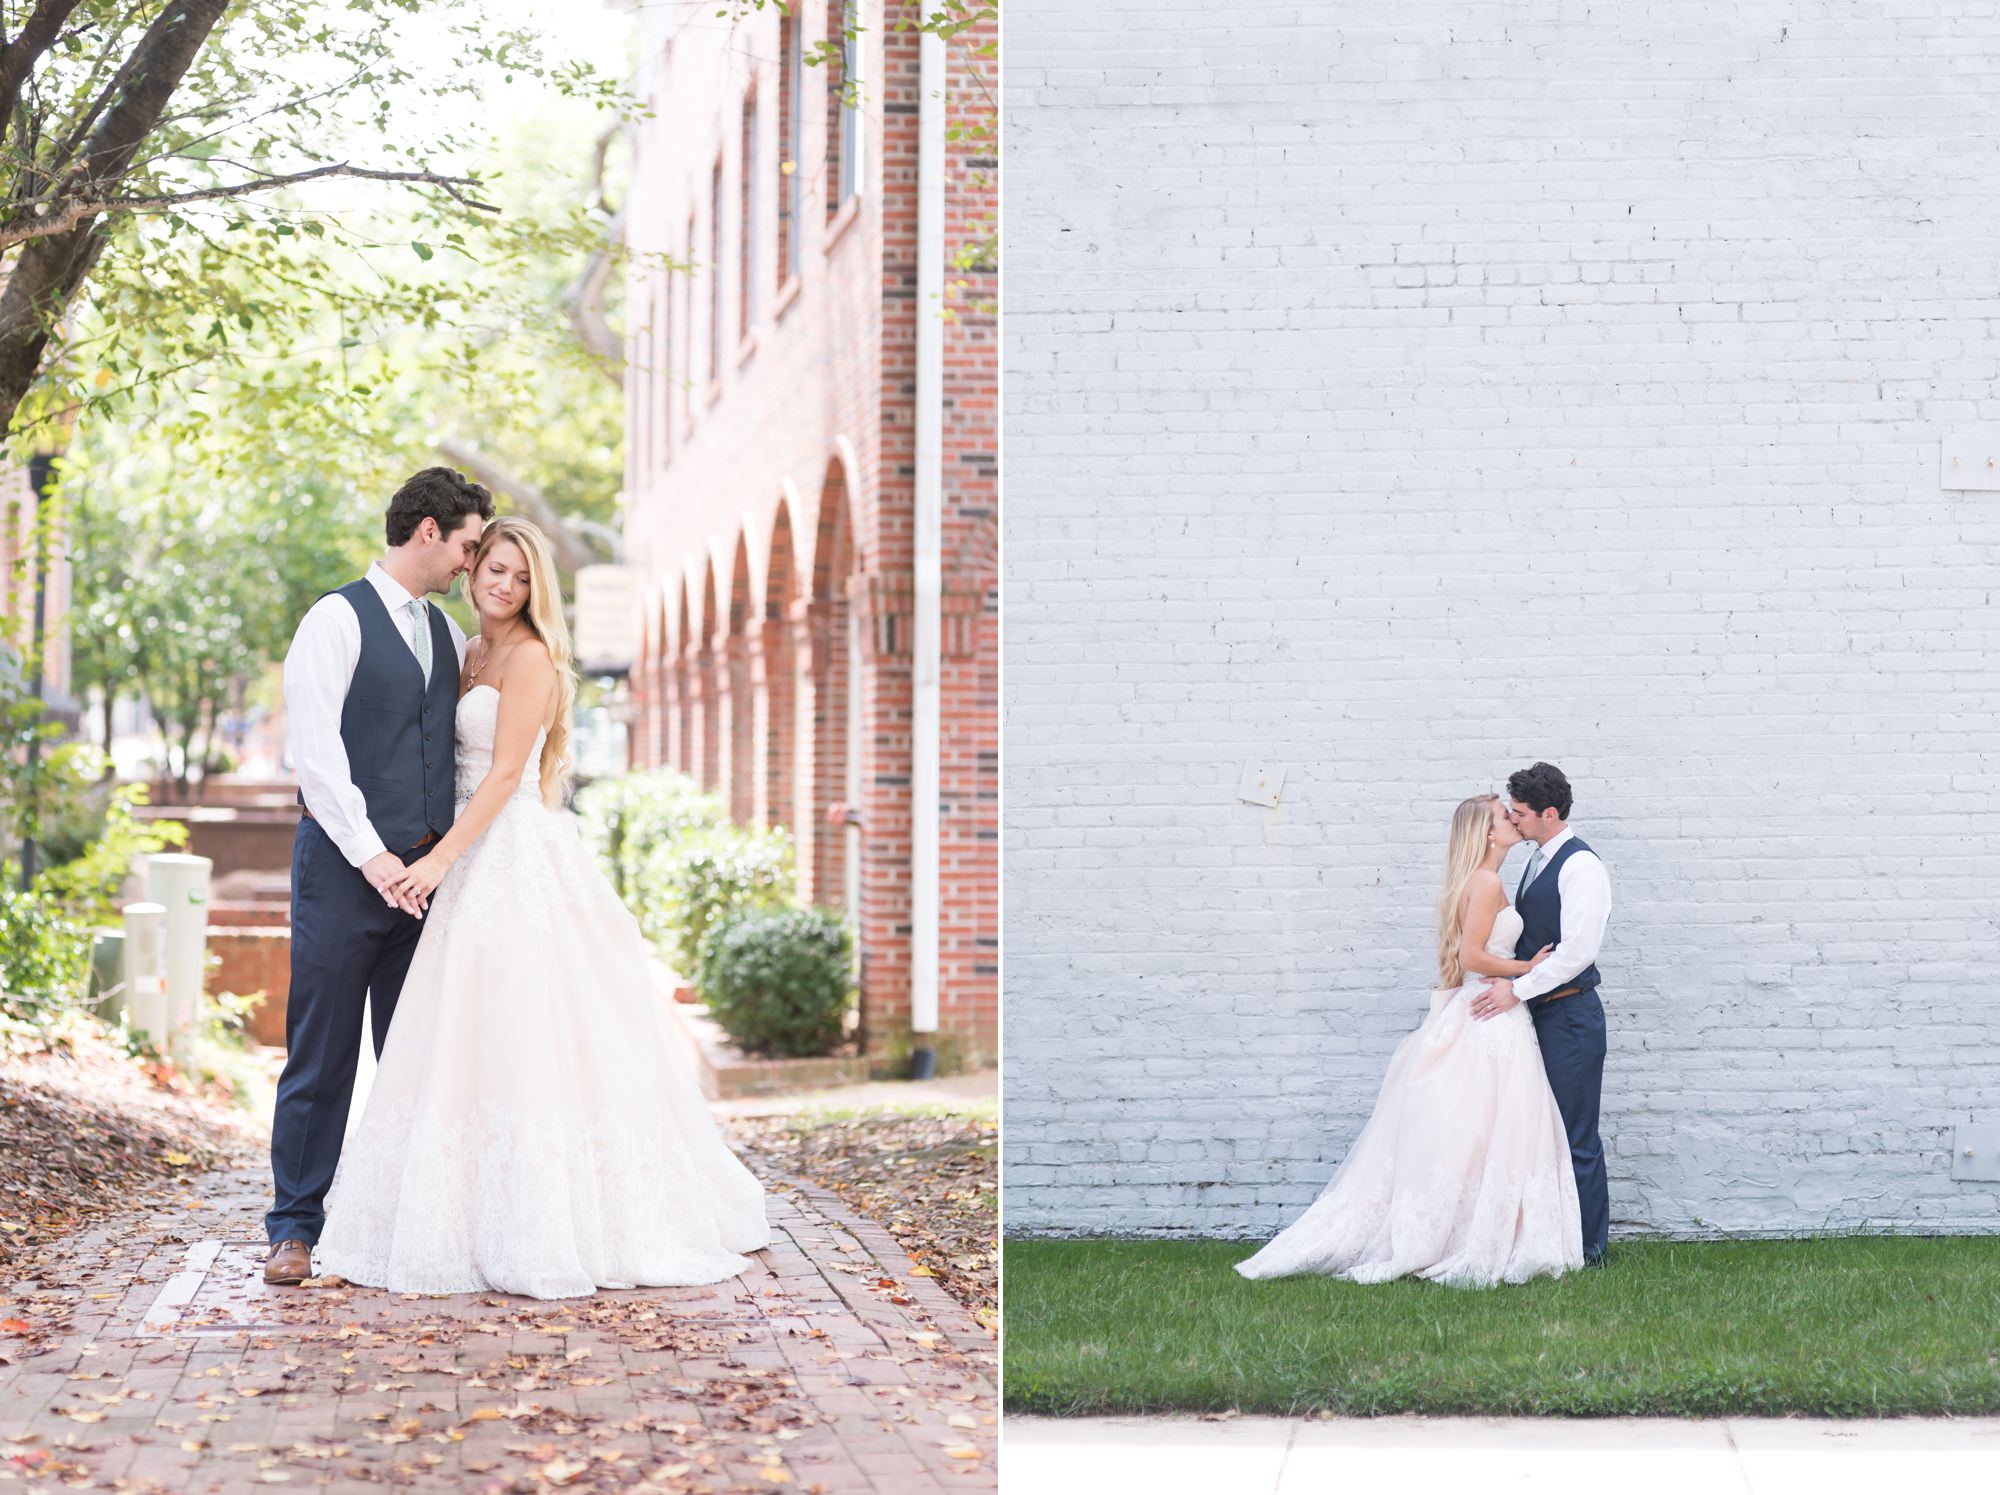 Kelly + Mike | Day After Wedding Session | Anna Wisjo Photography